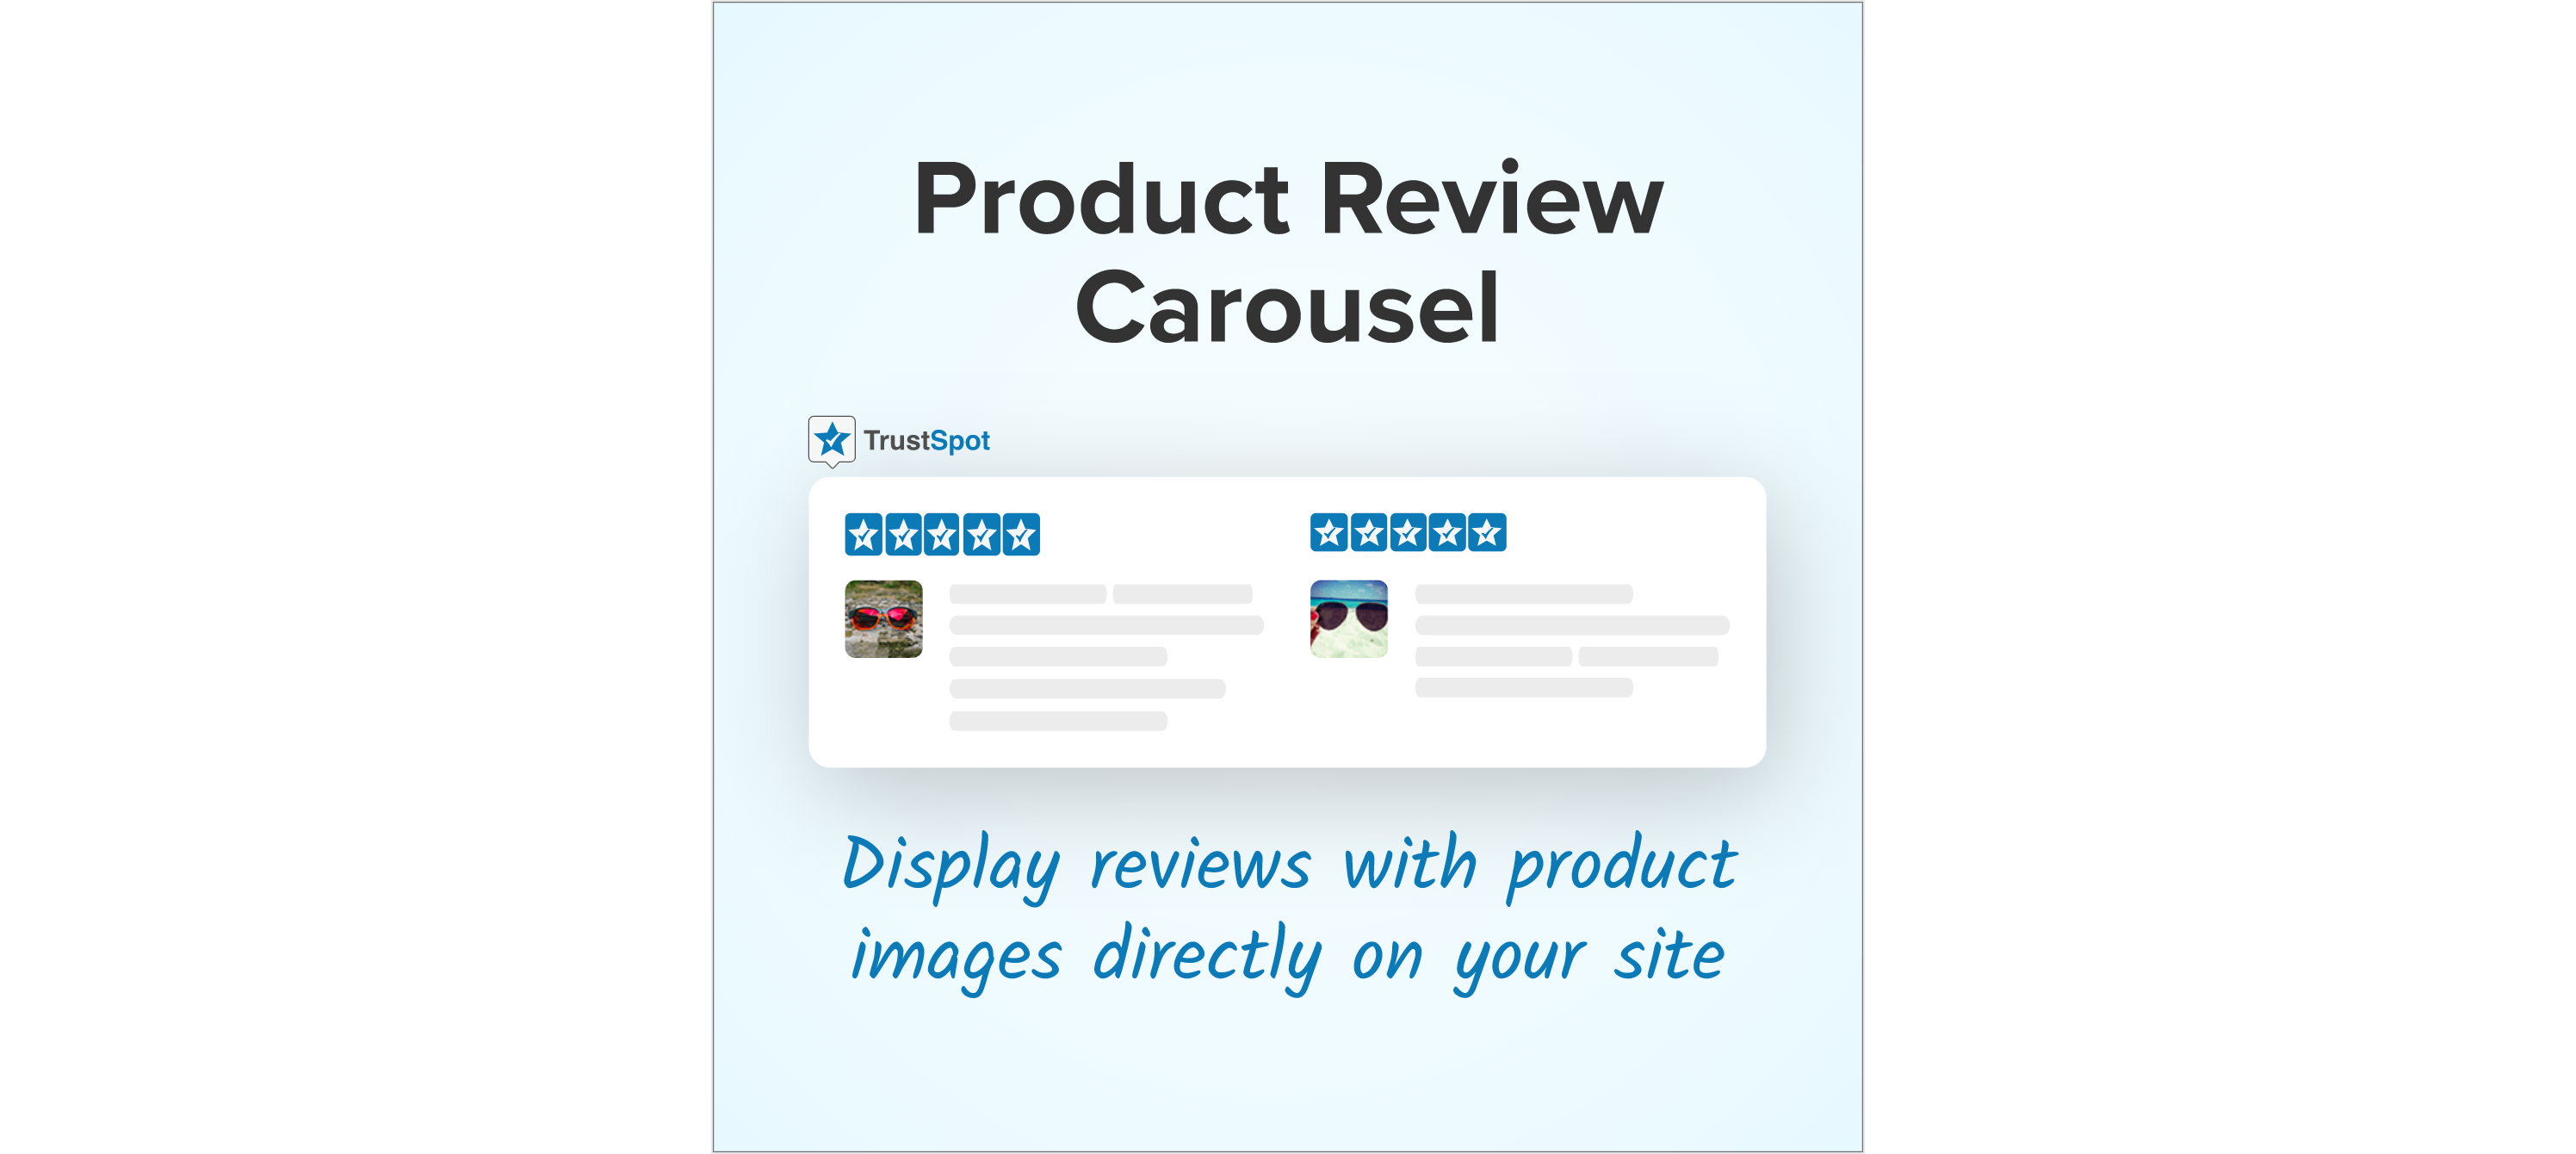 Display reviews with product images directly on your site.